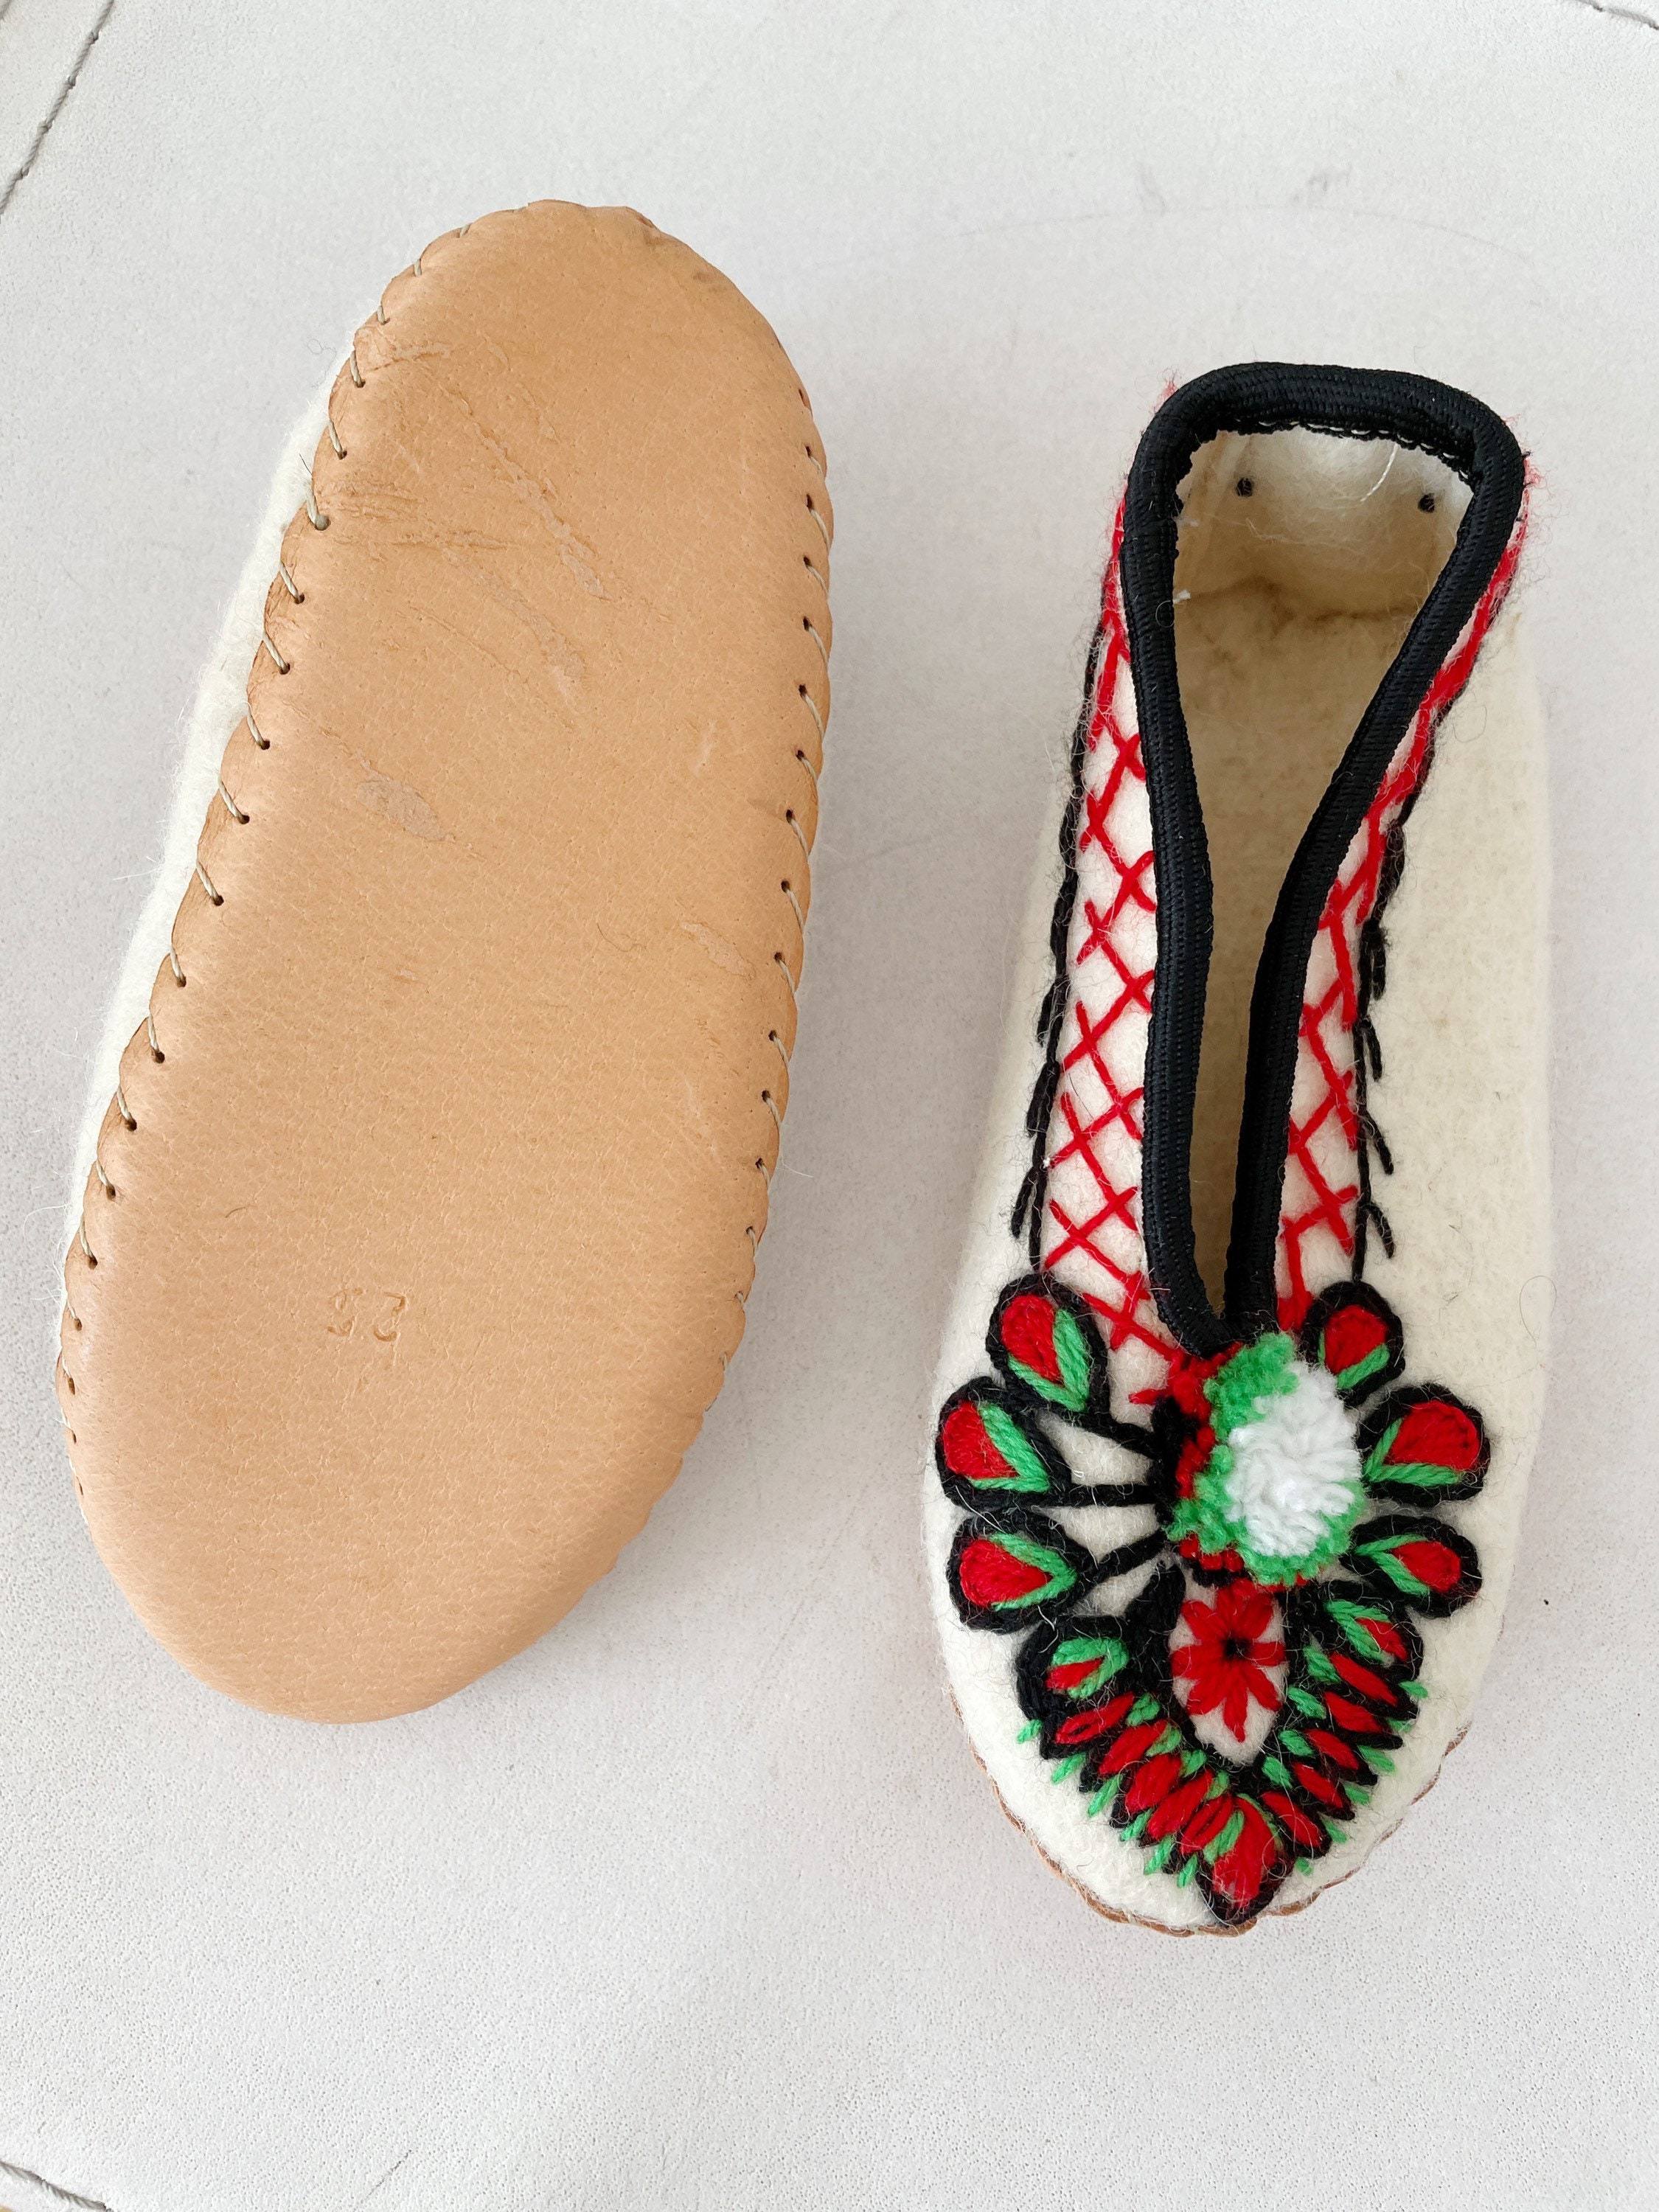 OFFA Slippers Slippers For Women Men, Old Beijing Shoes Embroidery Vintage  Folk-custom Shoes Kung Fu Slipper, Cotton And Linen Women's Sandals Indoor  Outdoor House Shoes Bedroom Slipper Soft Sole : Amazon.co.uk: Fashion